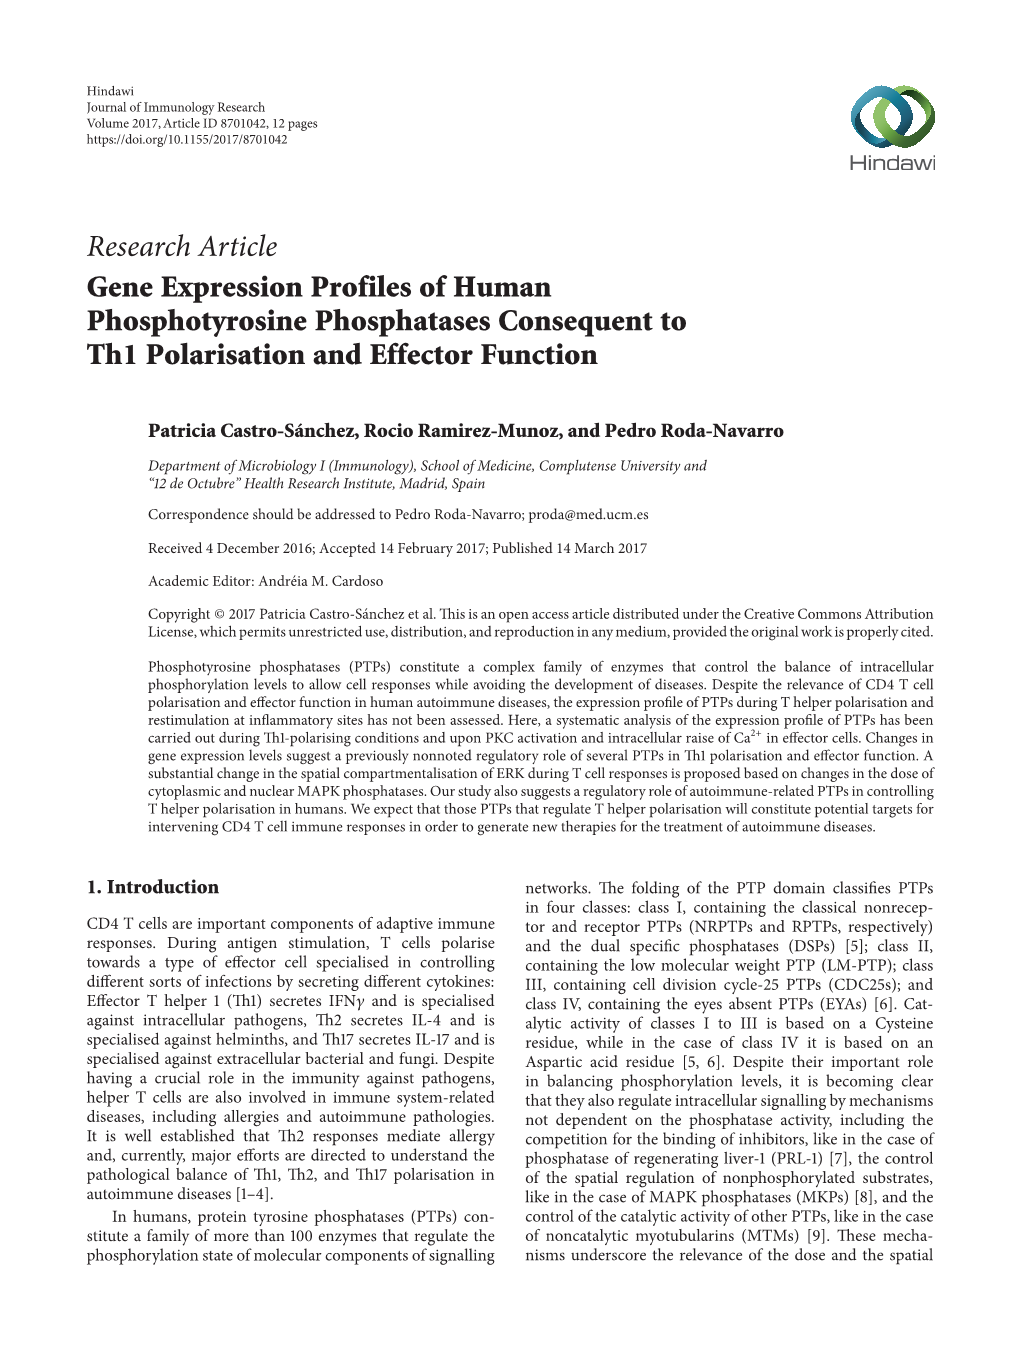 Research Article Gene Expression Profiles of Human Phosphotyrosine Phosphatases Consequent to Th1 Polarisation and Effector Function